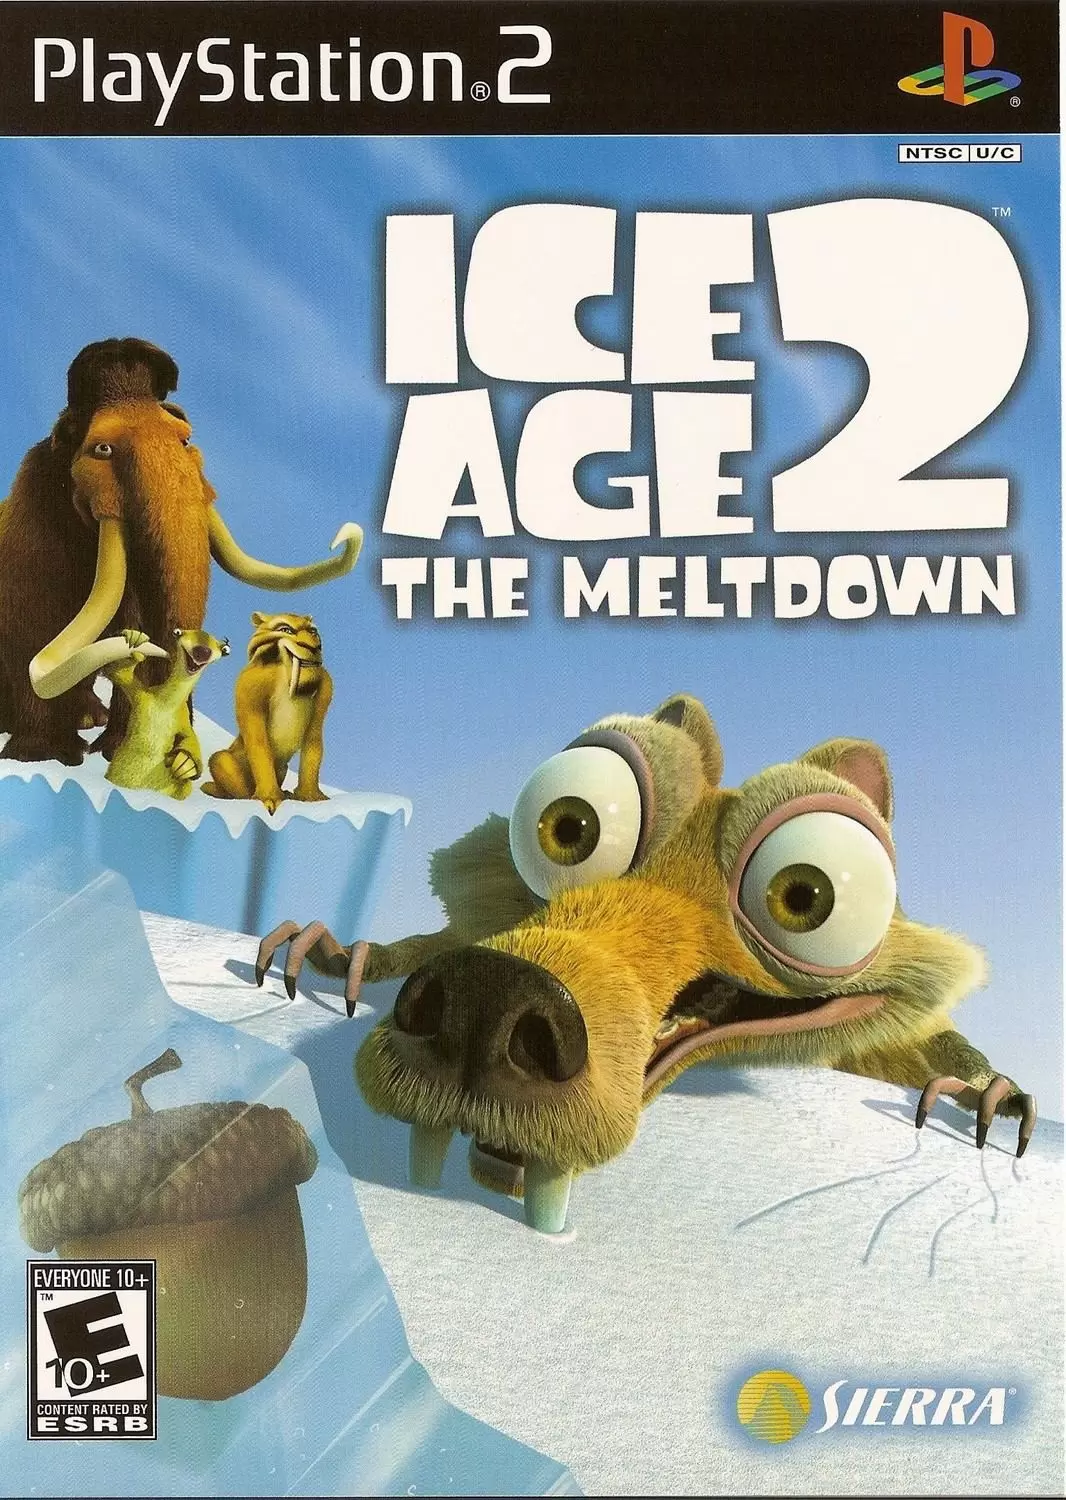 PS2 Games - Ice Age 2: The Meltdown